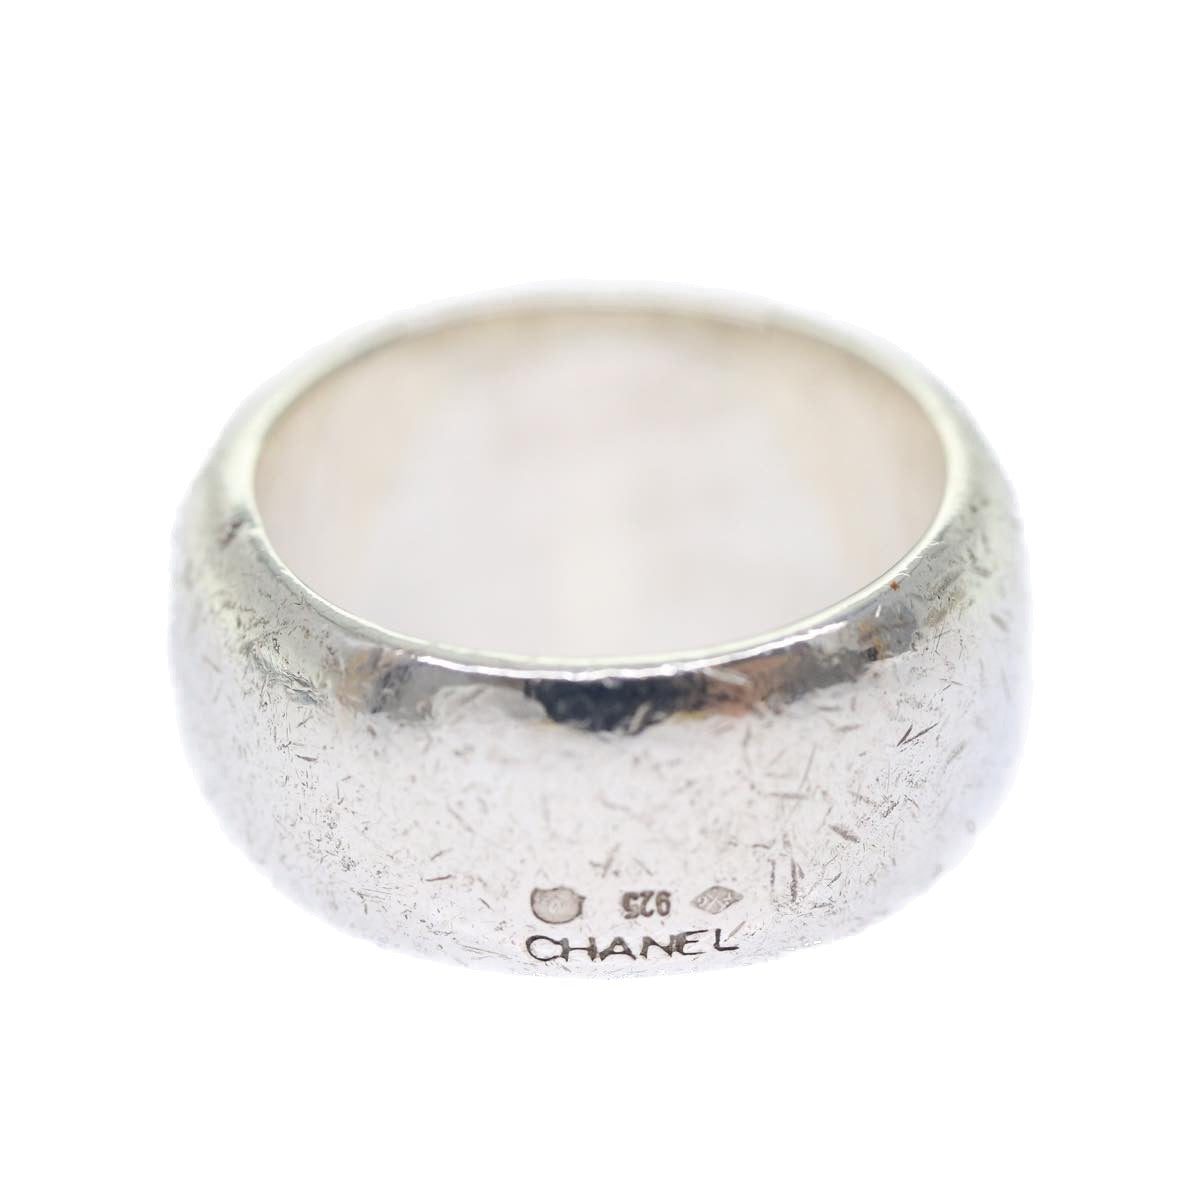 CHANEL Ring Ag925 Silver CC Auth bs7316